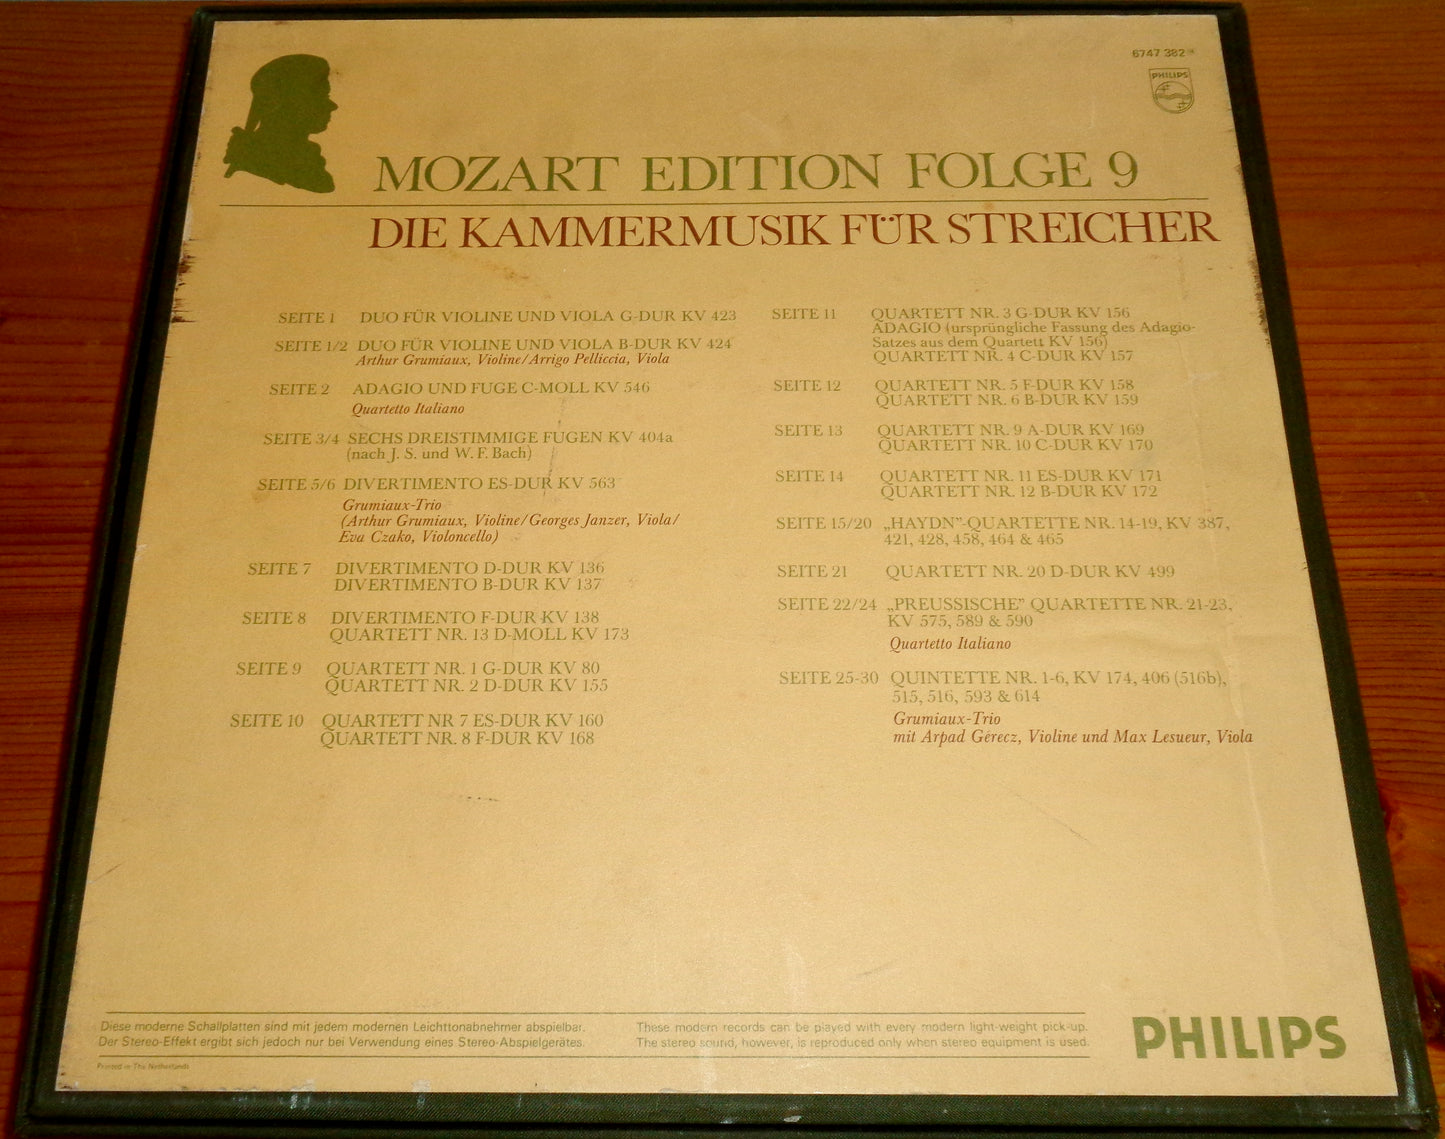 Philips Mozart Edition 9 The Chamber Music For Strings 6747 382. Box Set Comprising 15 LPs